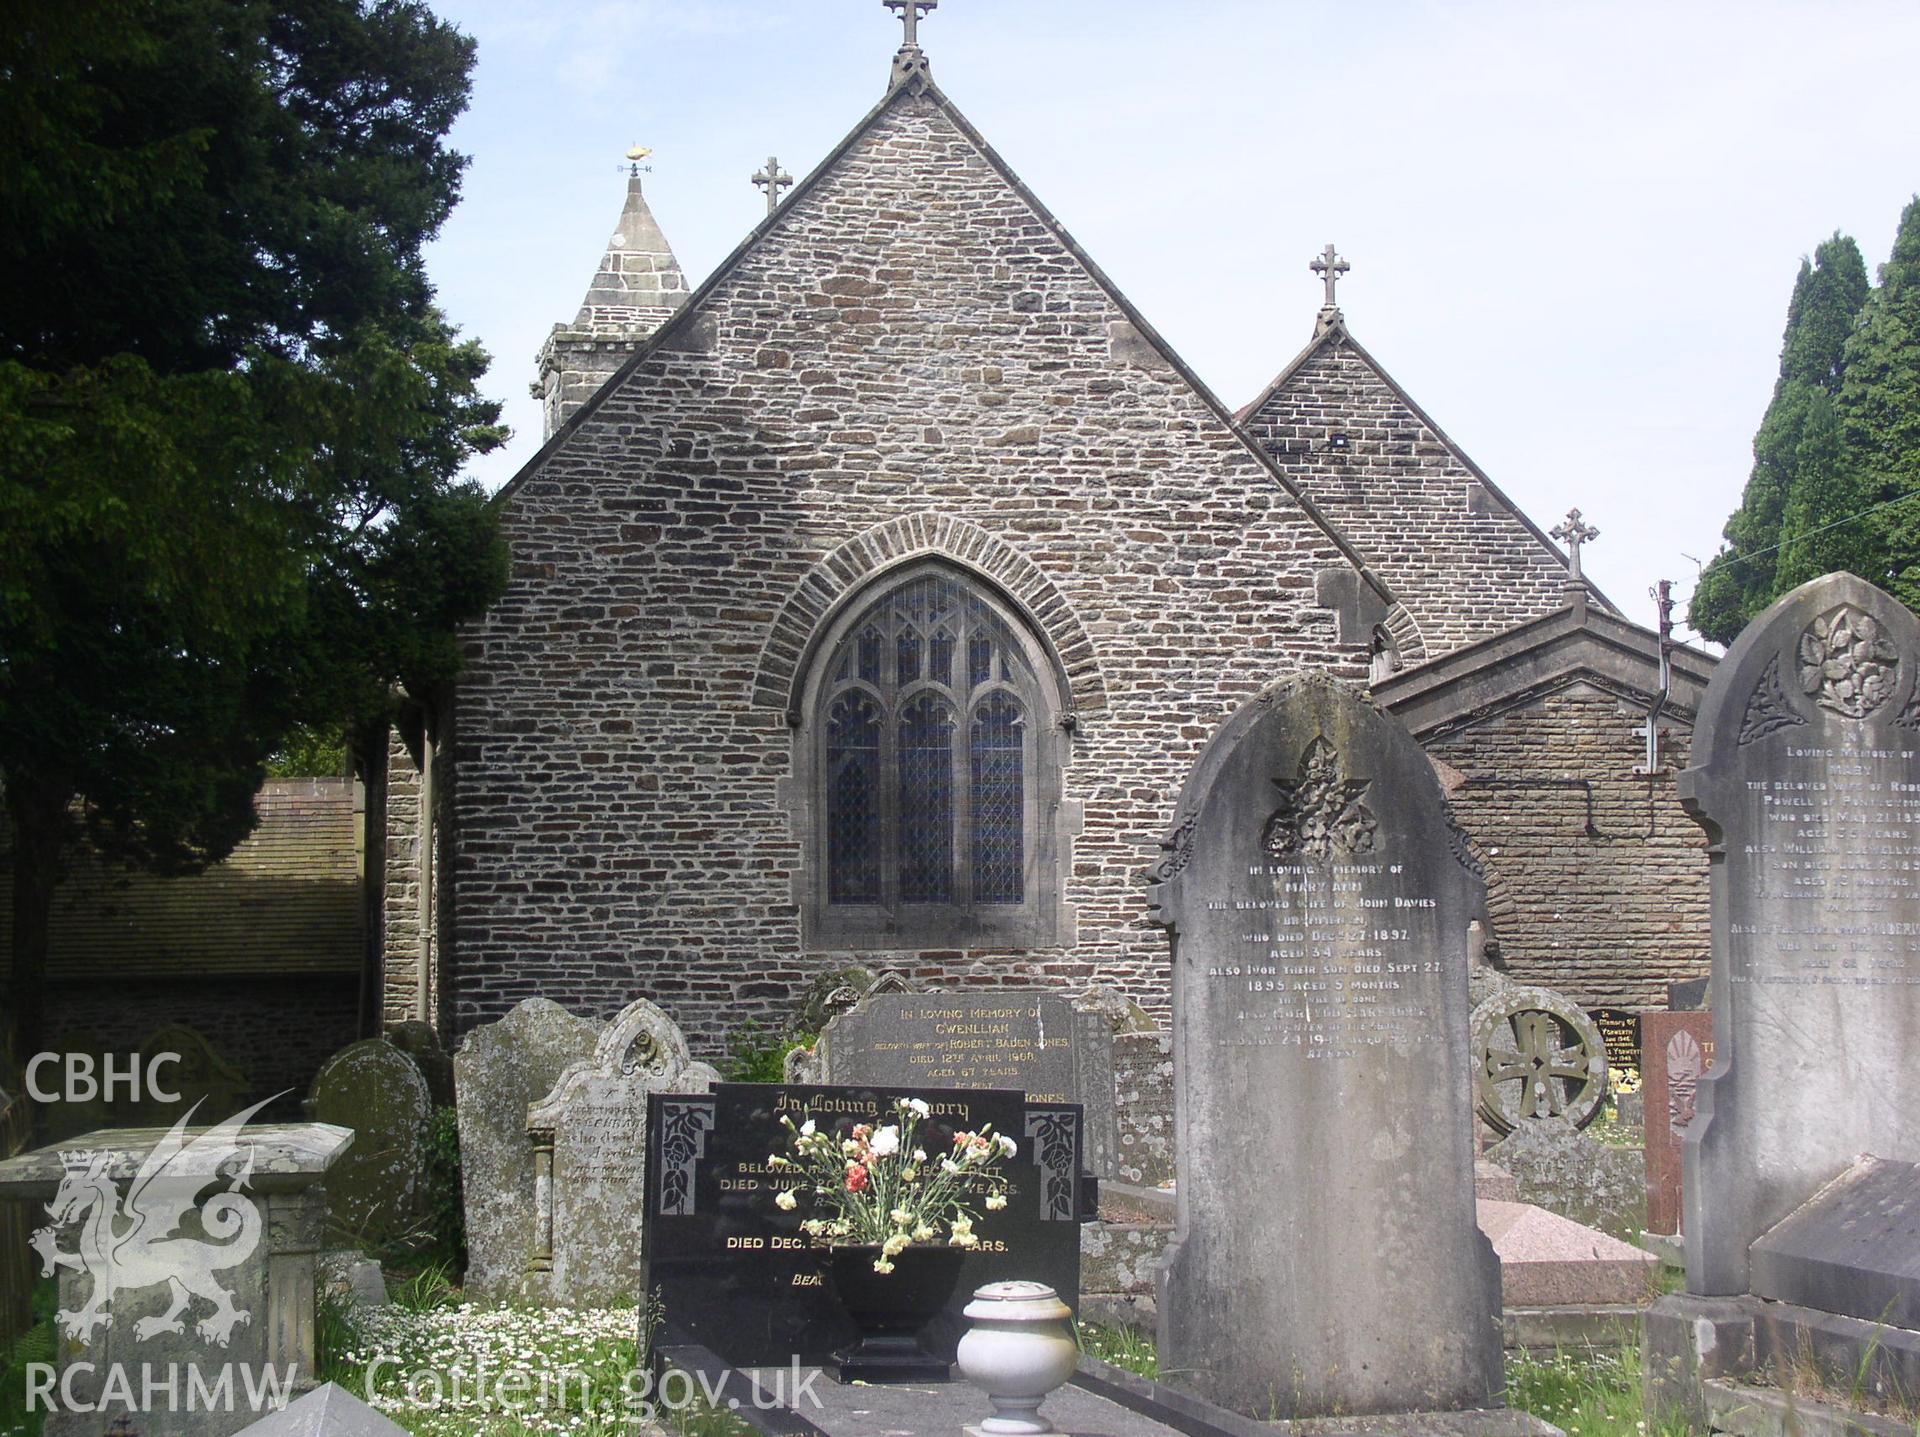 Colour digital photograph showing the exterior of the Church of St. David, Betws; Glamorgan.